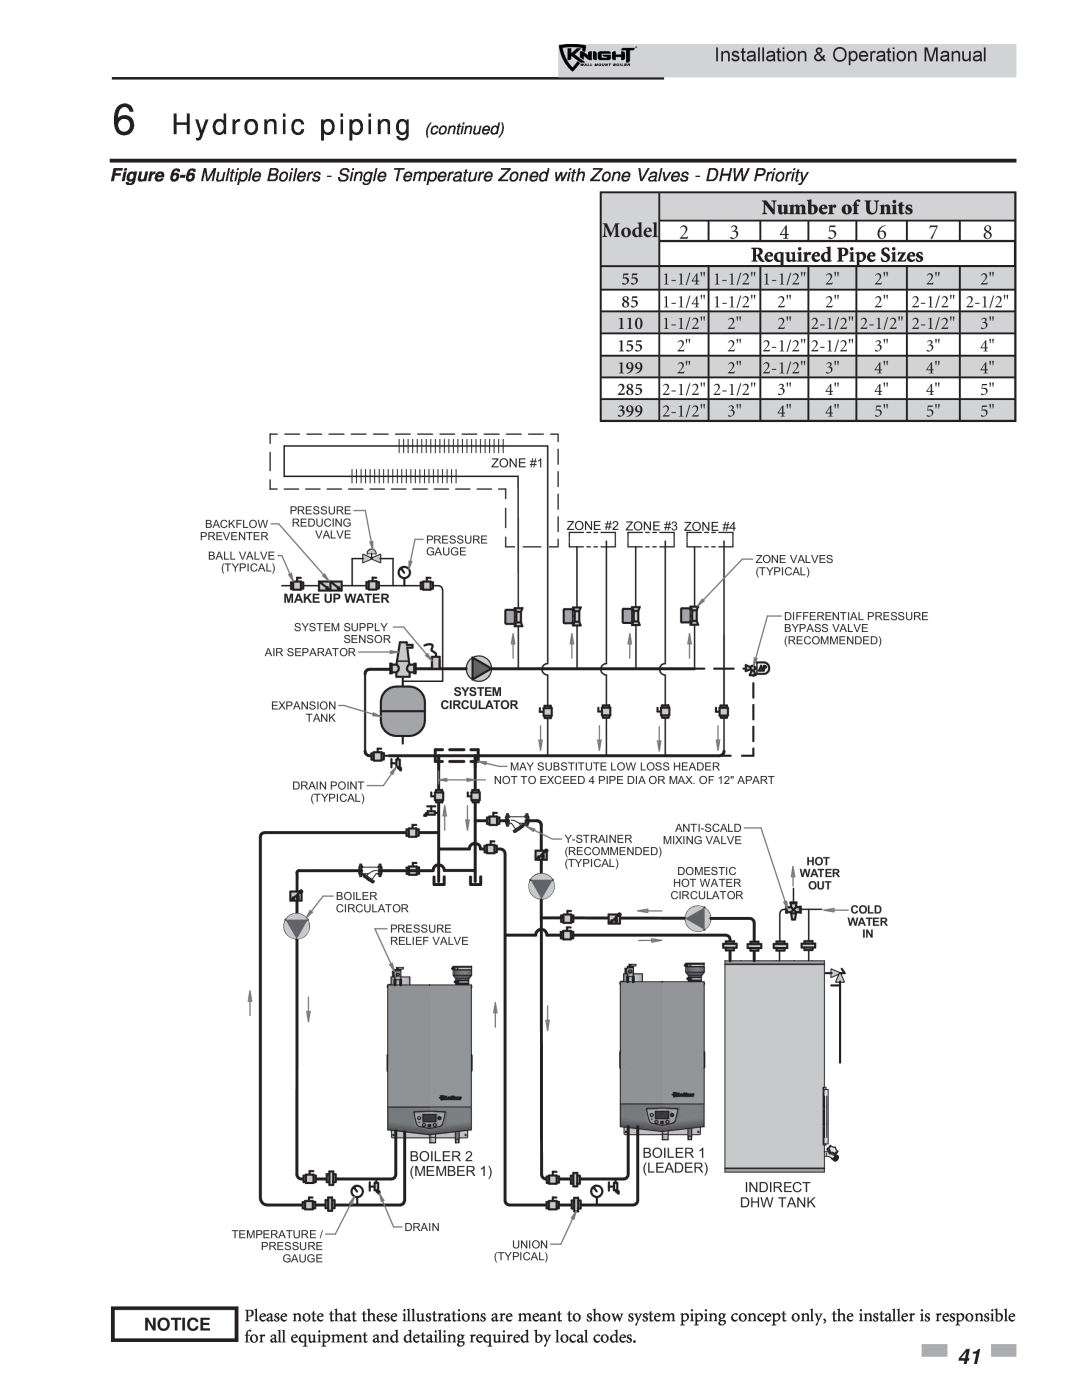 Lochinvar WH 55-399 operation manual Number of Units, Required Pipe Sizes, Model, Hydronic piping continued, Notice 